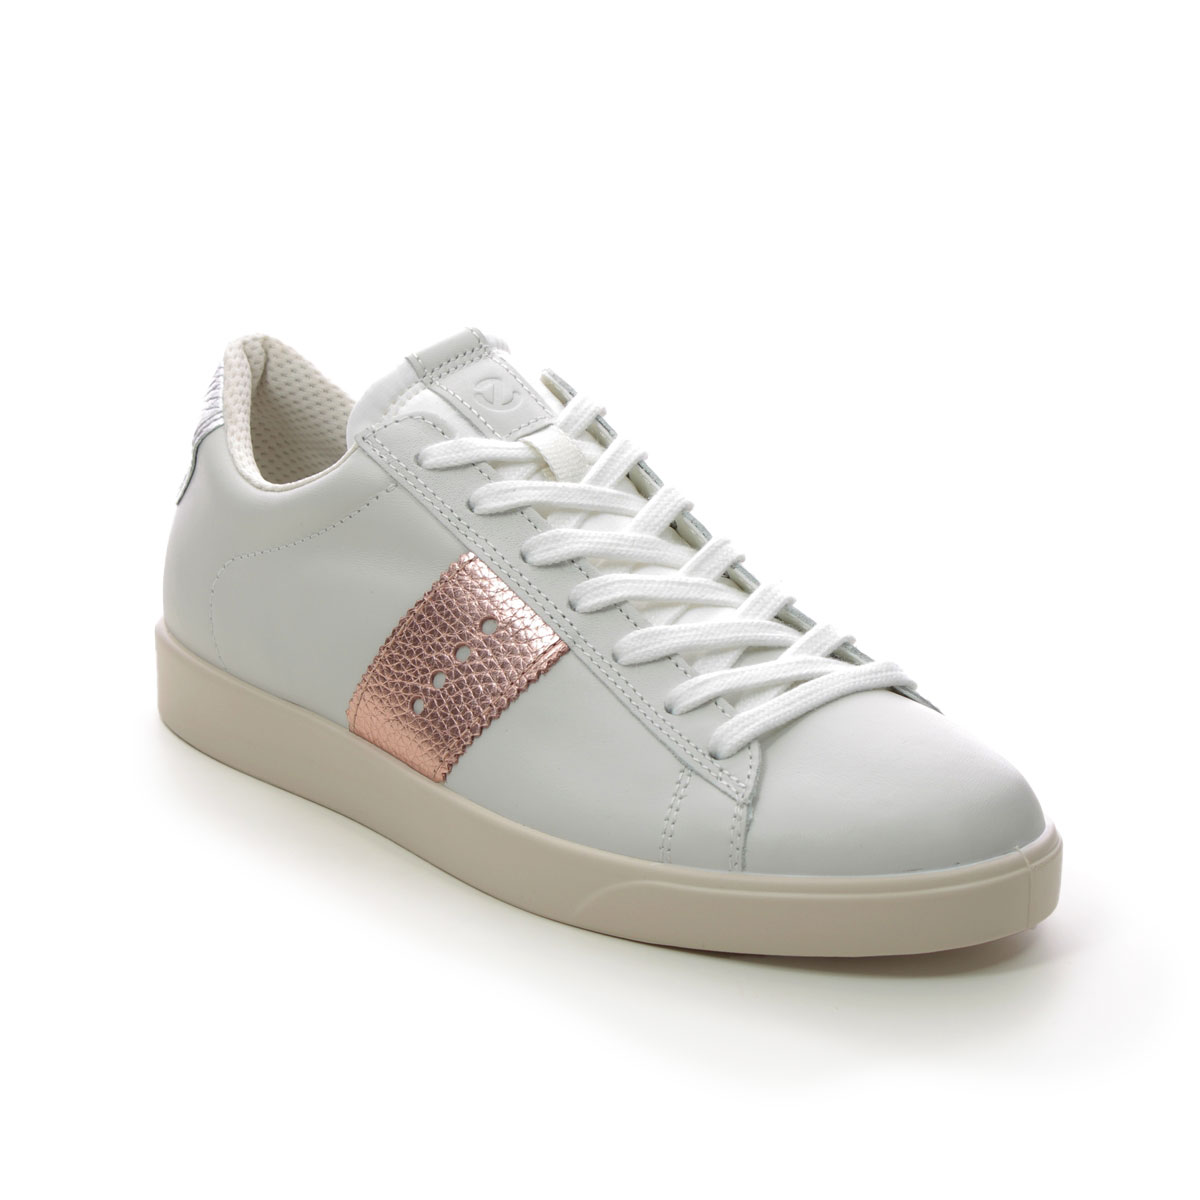 Ecco Street Lite Womens White Rose Gold Womens Trainers 212803-60717 In Size 40 In Plain White Rose Gold